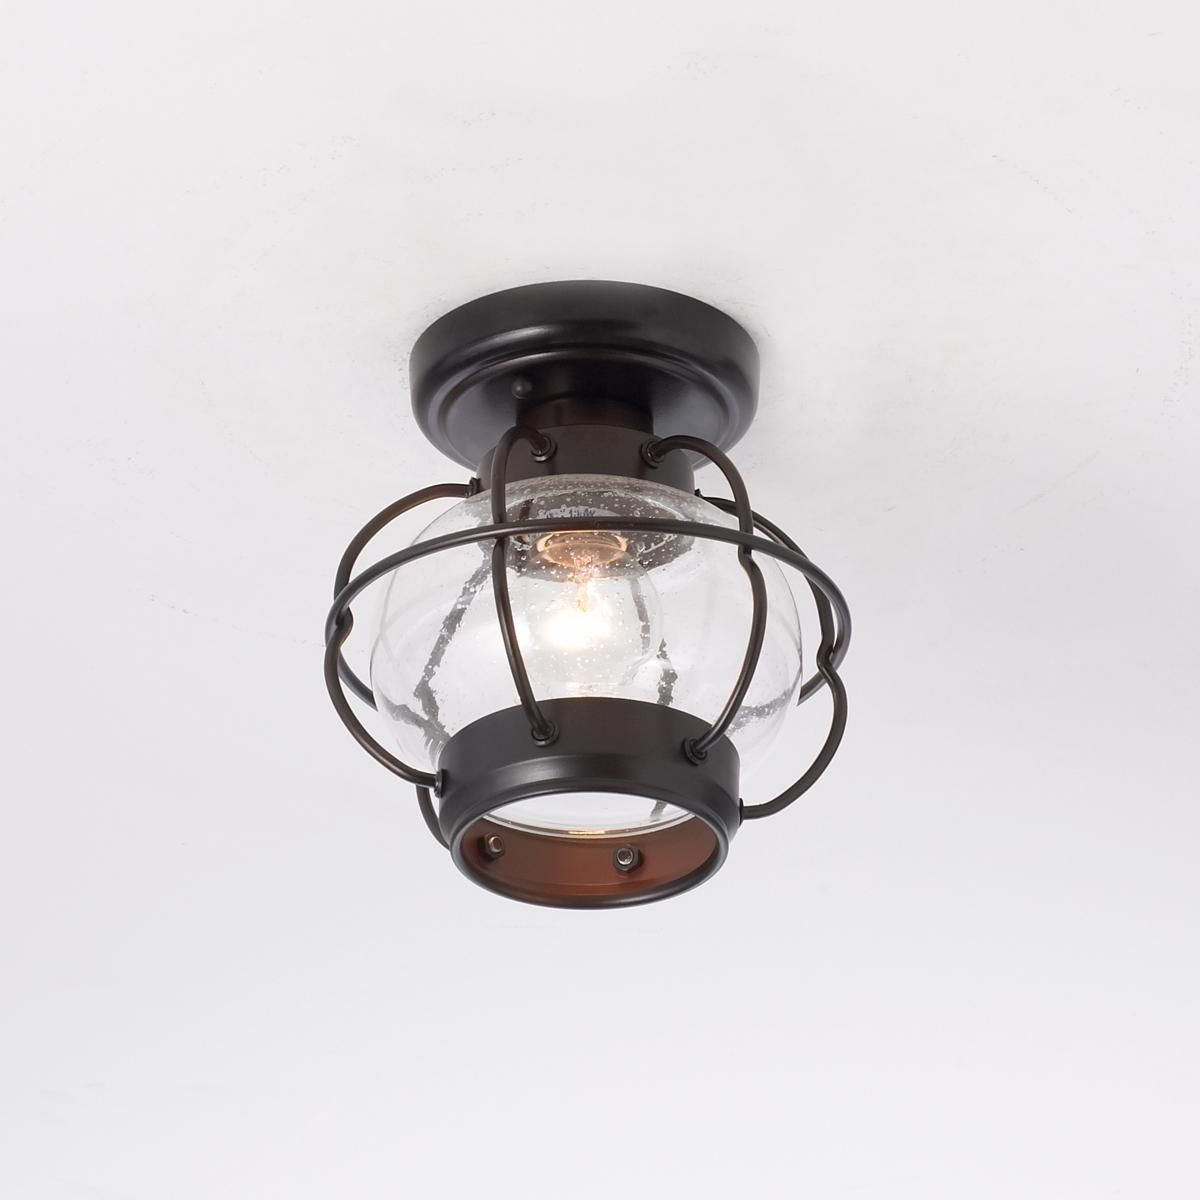 Nautical Onion Outdoor Ceiling Light | Outdoor Ceiling Lights With Regard To Coastal Outdoor Ceiling Lights (View 11 of 15)